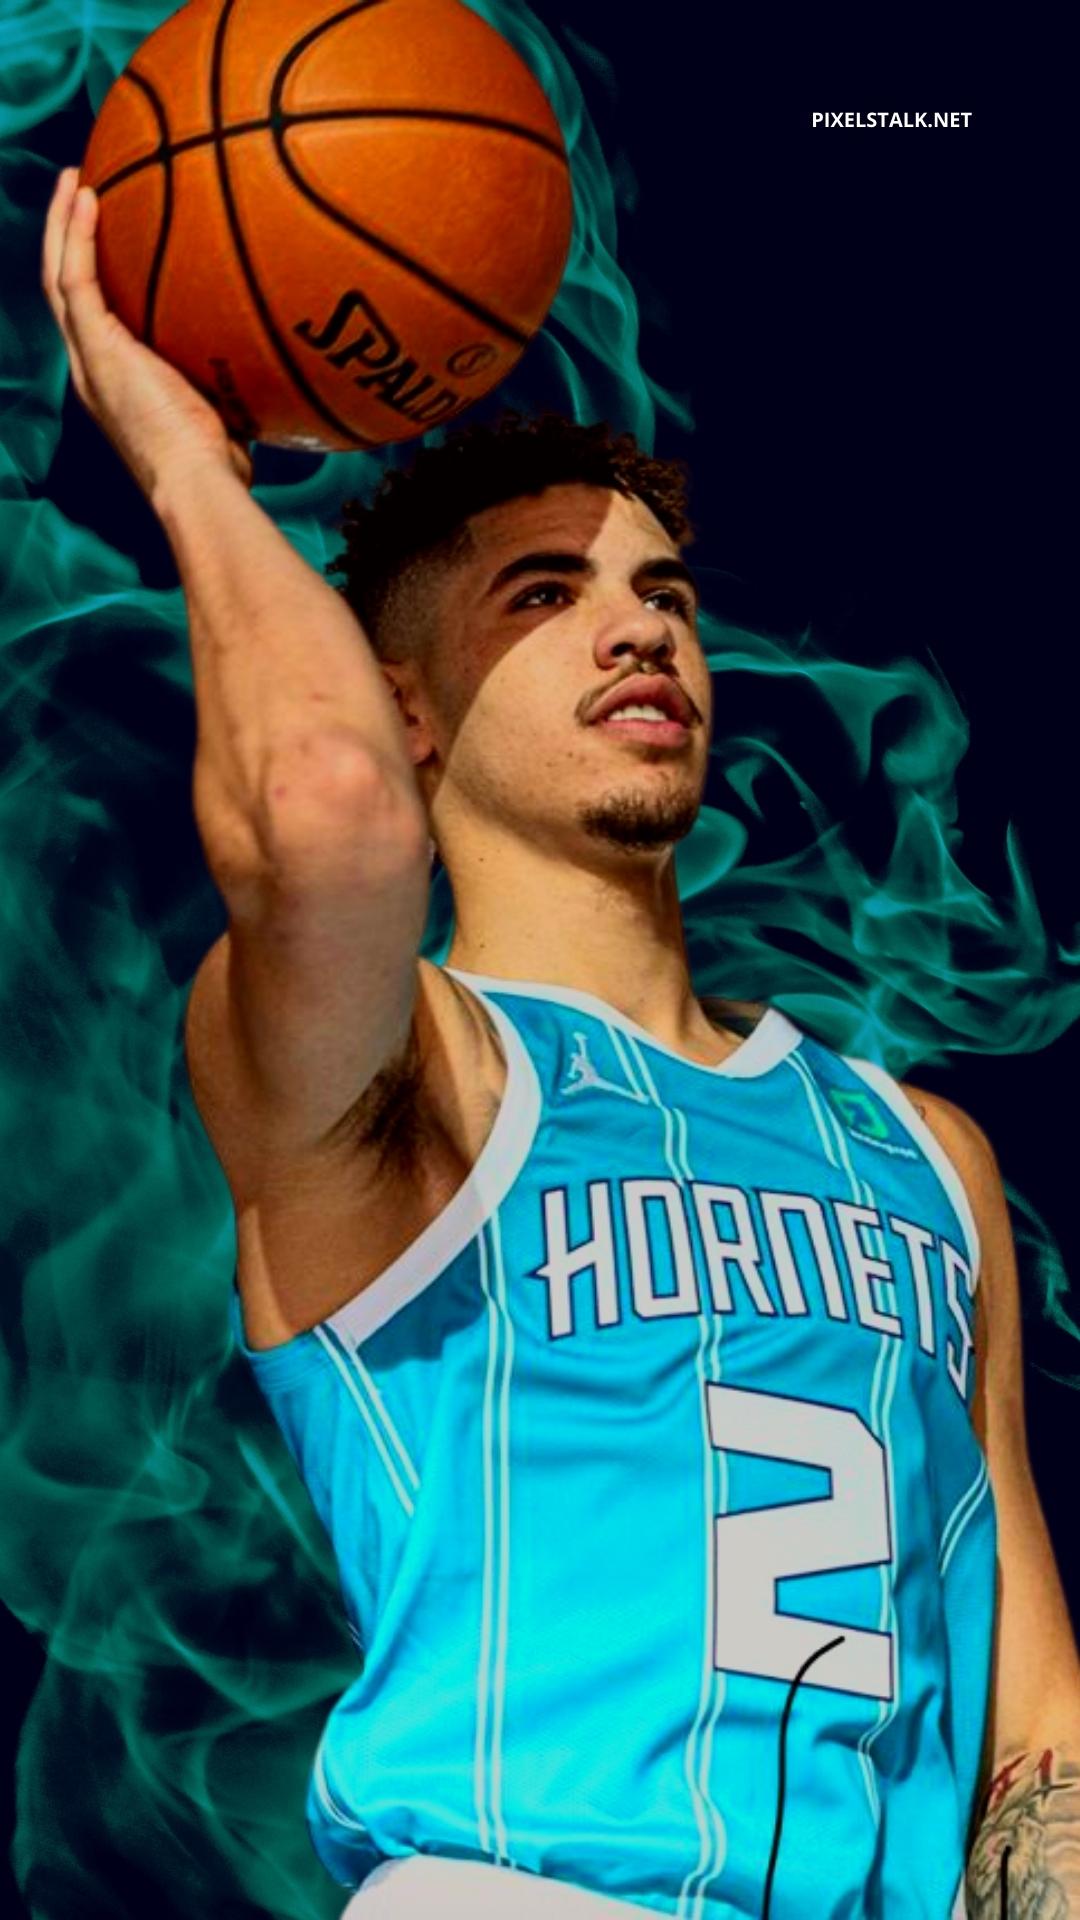 Aggregate 66+ cool lamelo ball wallpapers best - in.cdgdbentre